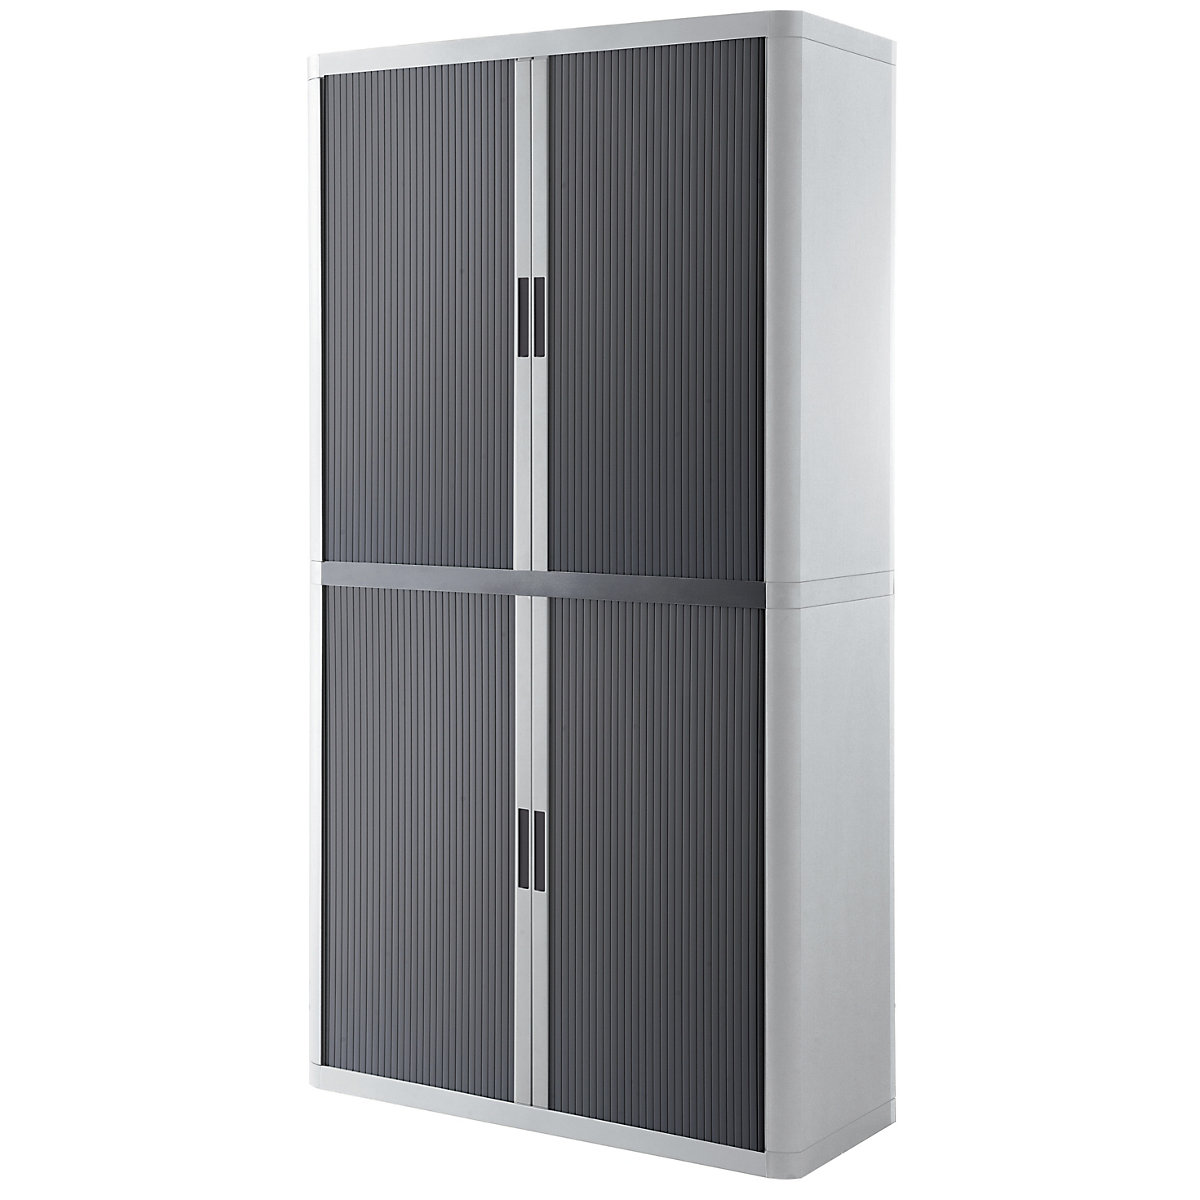 easyOffice® roller shutter cupboard – Paperflow, 4 shelves, height 2040 mm, white / charcoal-16